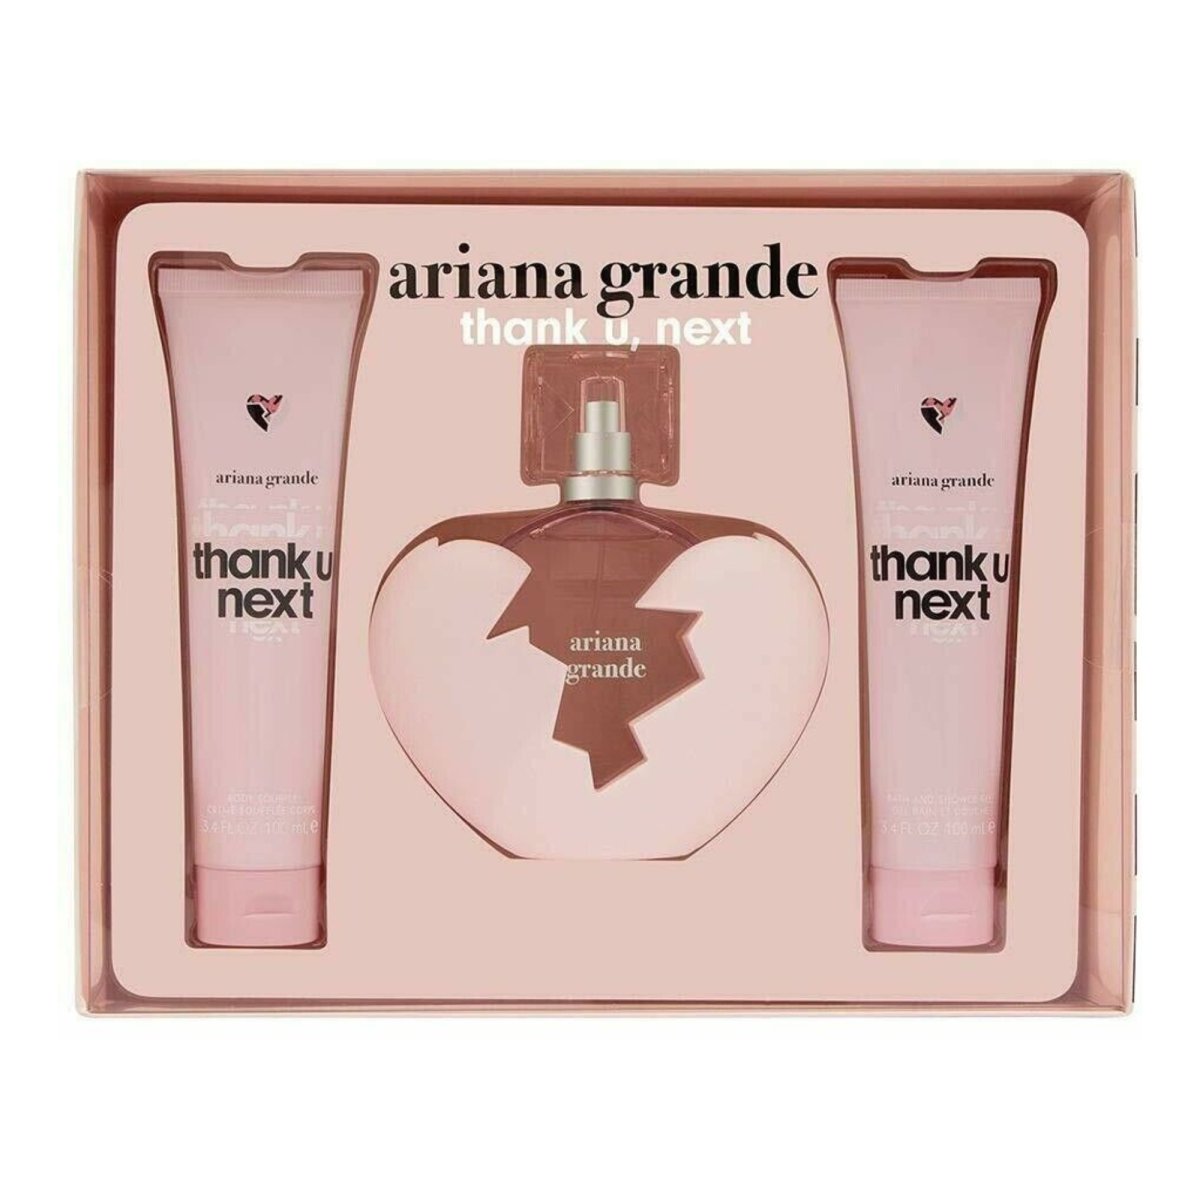 A boxed set of Ariana Grande's 'thank u, next' fragrance collection, featuring a 3.4 oz Eau de Parfum spray in a broken heart-shaped bottle, alongside matching 3.4 oz tubes of Body Soufflé and Bath and Shower Gel. - Ariana Grande - -